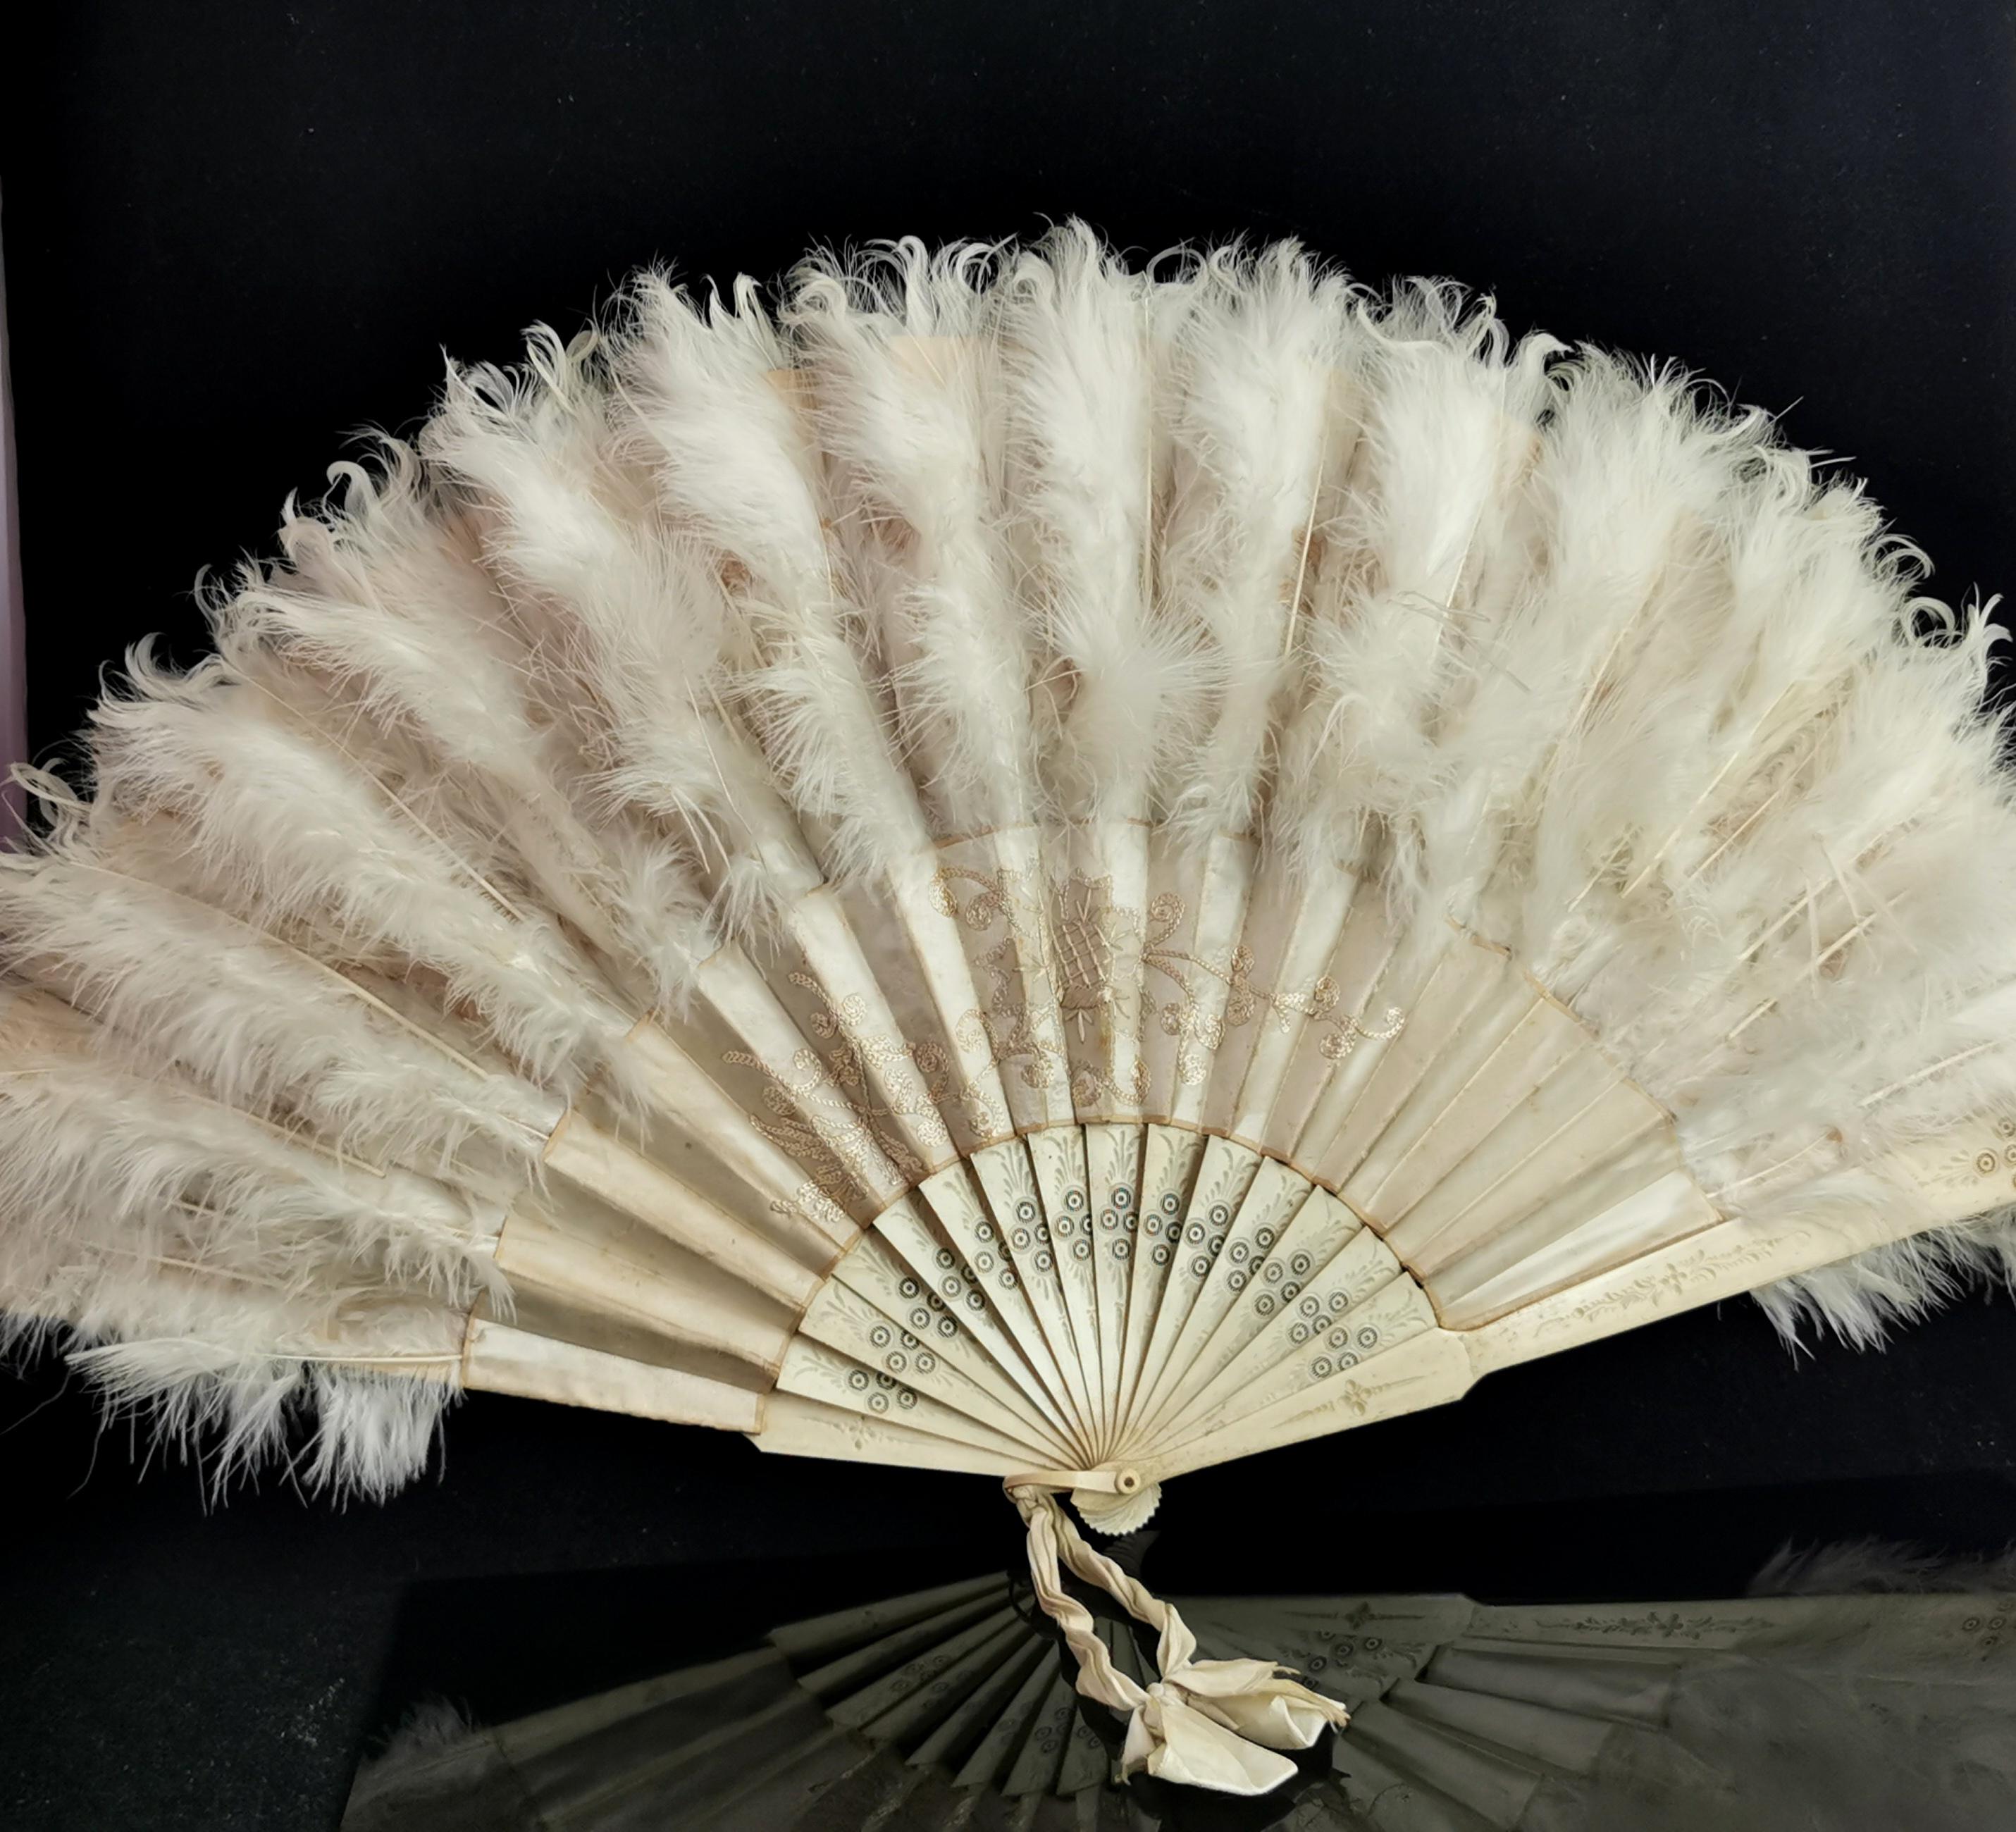 A stunning antique Victorian hand fan.

It is a large and elaborate fan with engraved and pierced bovine bone sticks and guards and is a folding fan.

The fan has a thistle floral embroidered silk base with the top being adorned with white feathers